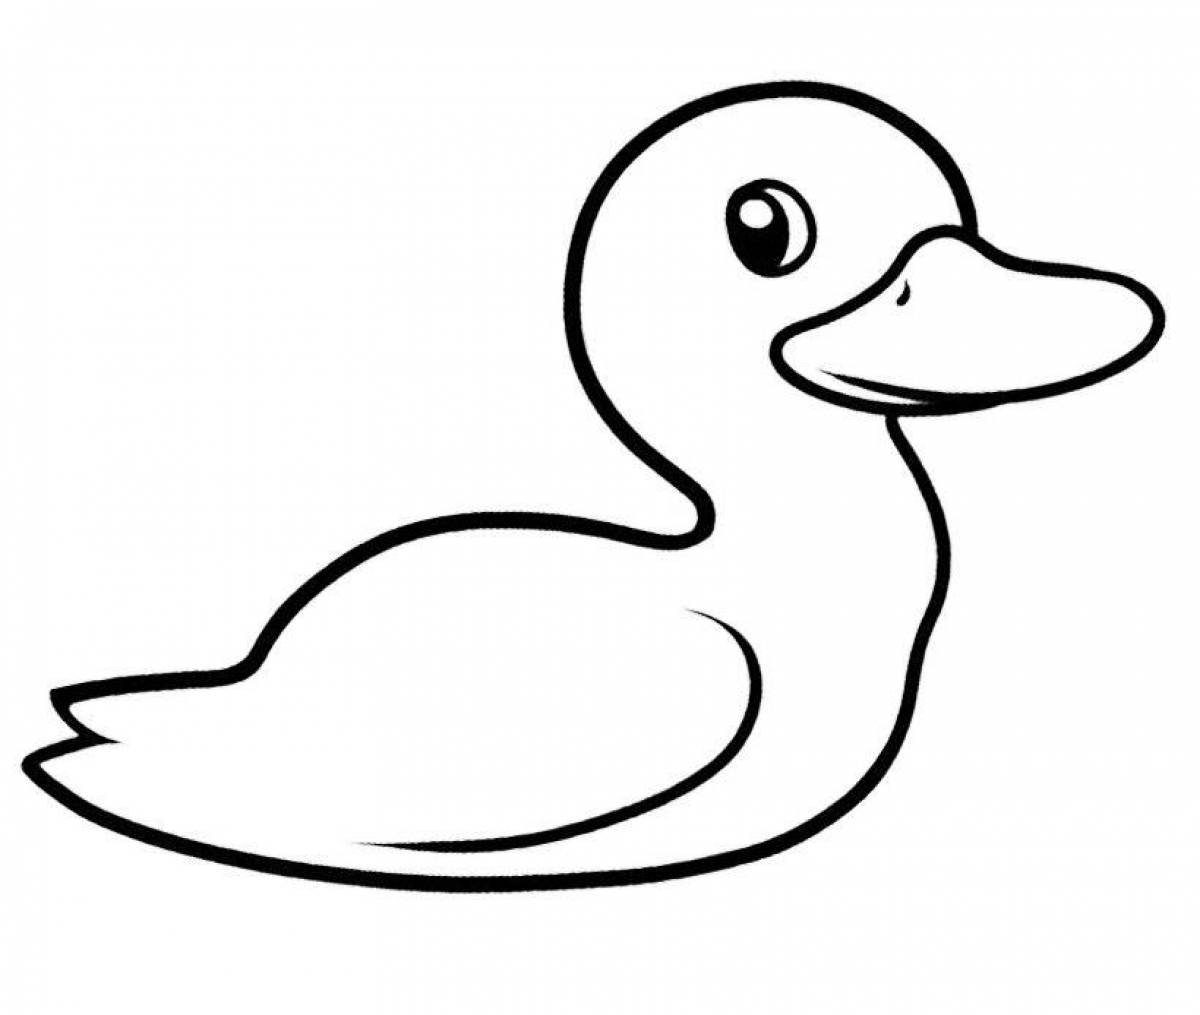 Charming duck coloring page